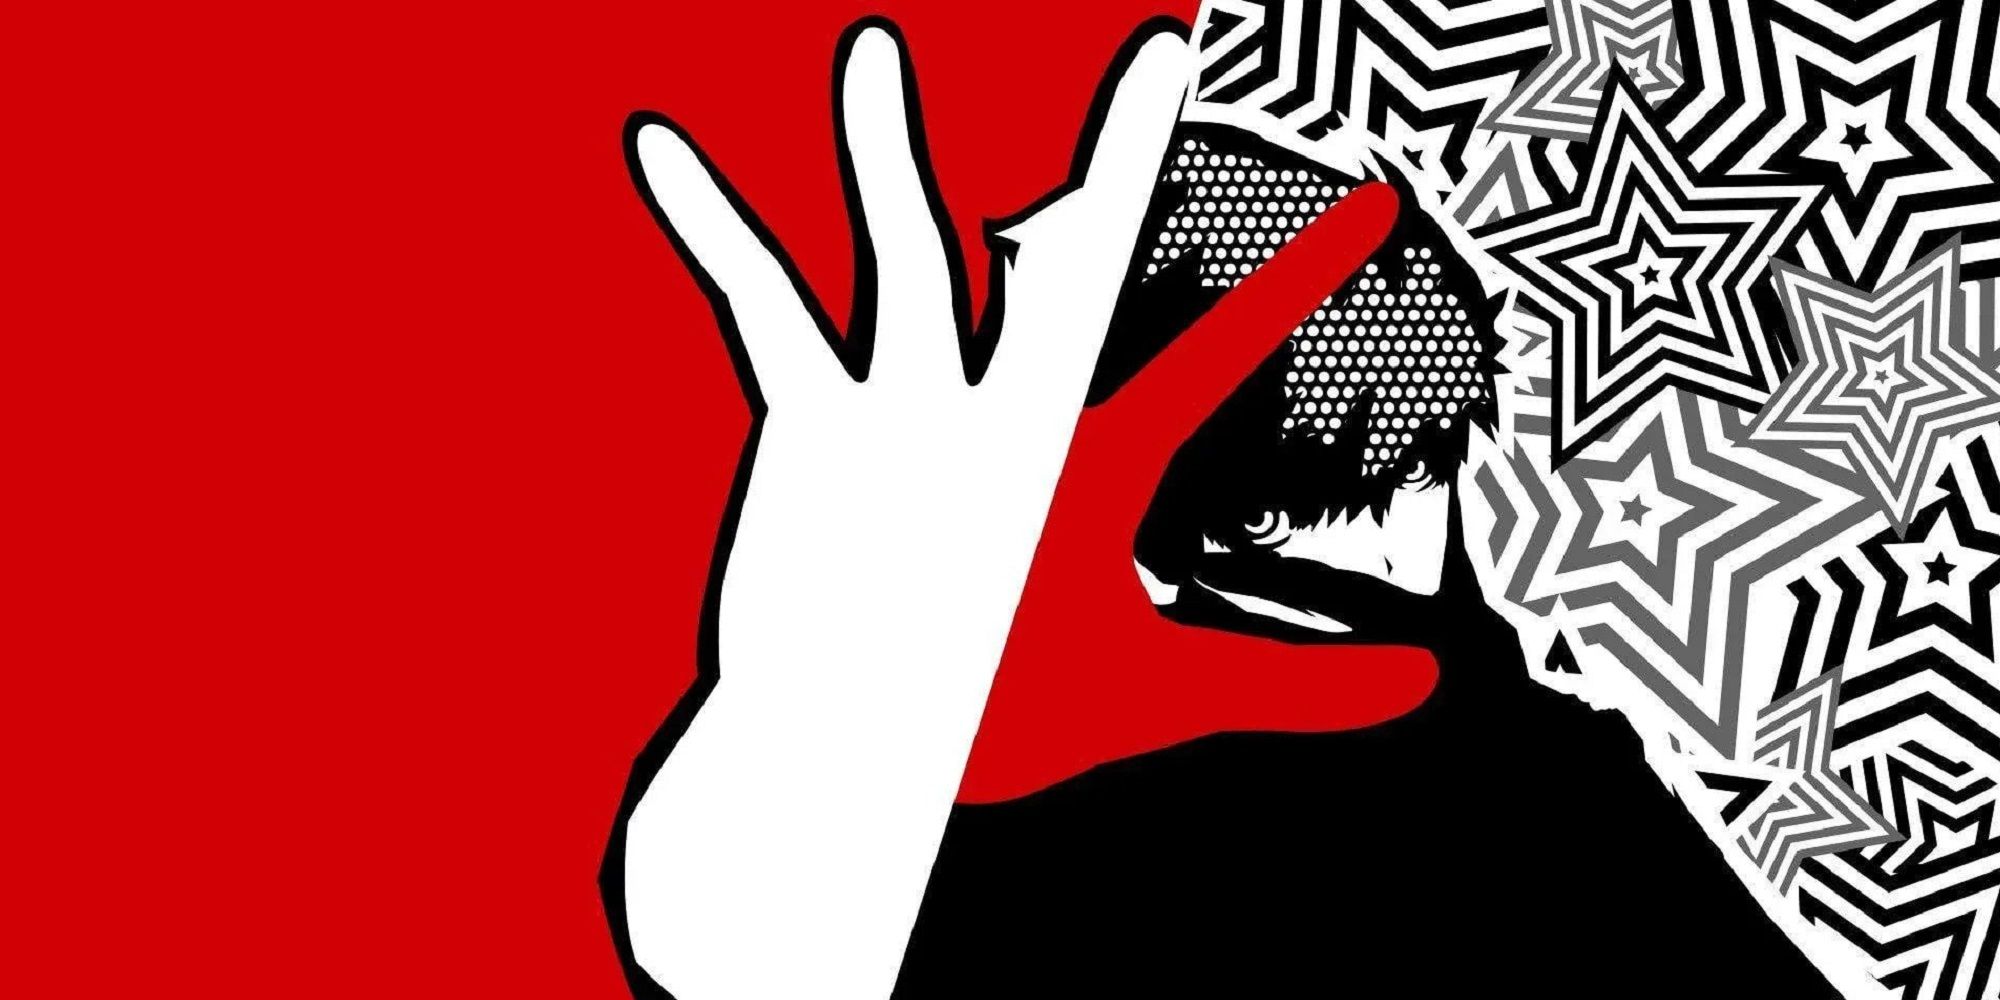 Persona 5 Wallpaper Of Joker Holding Out Hand That's White With Red Background